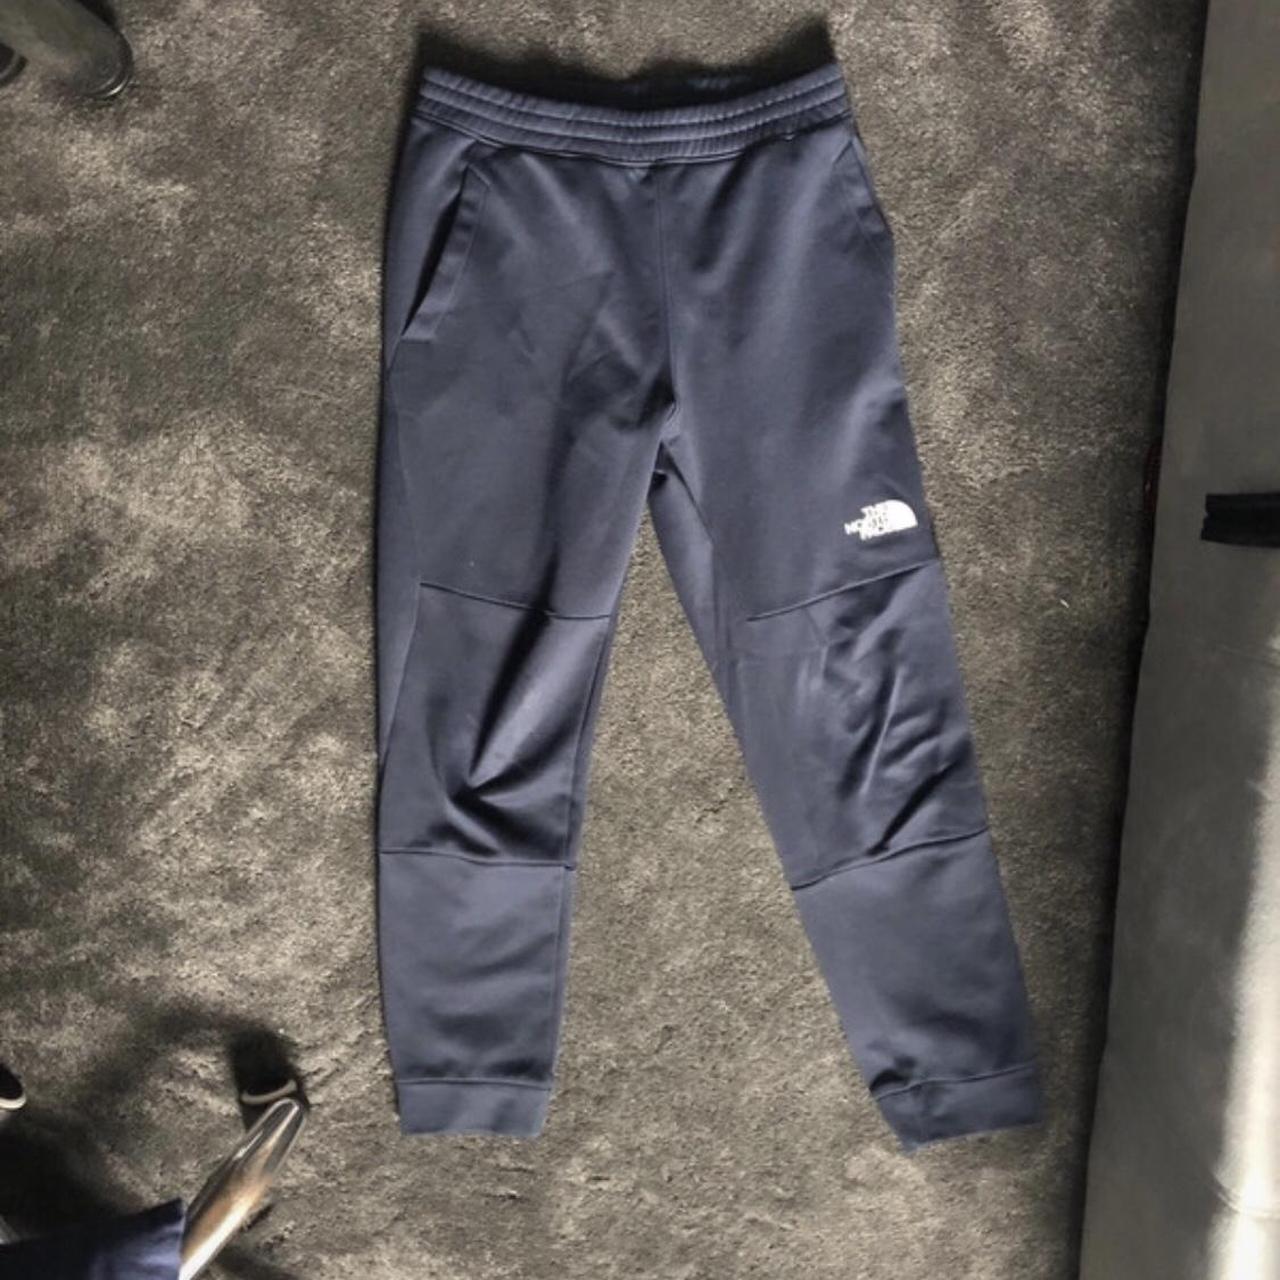 Blue North Face Joggers, great condition - Depop